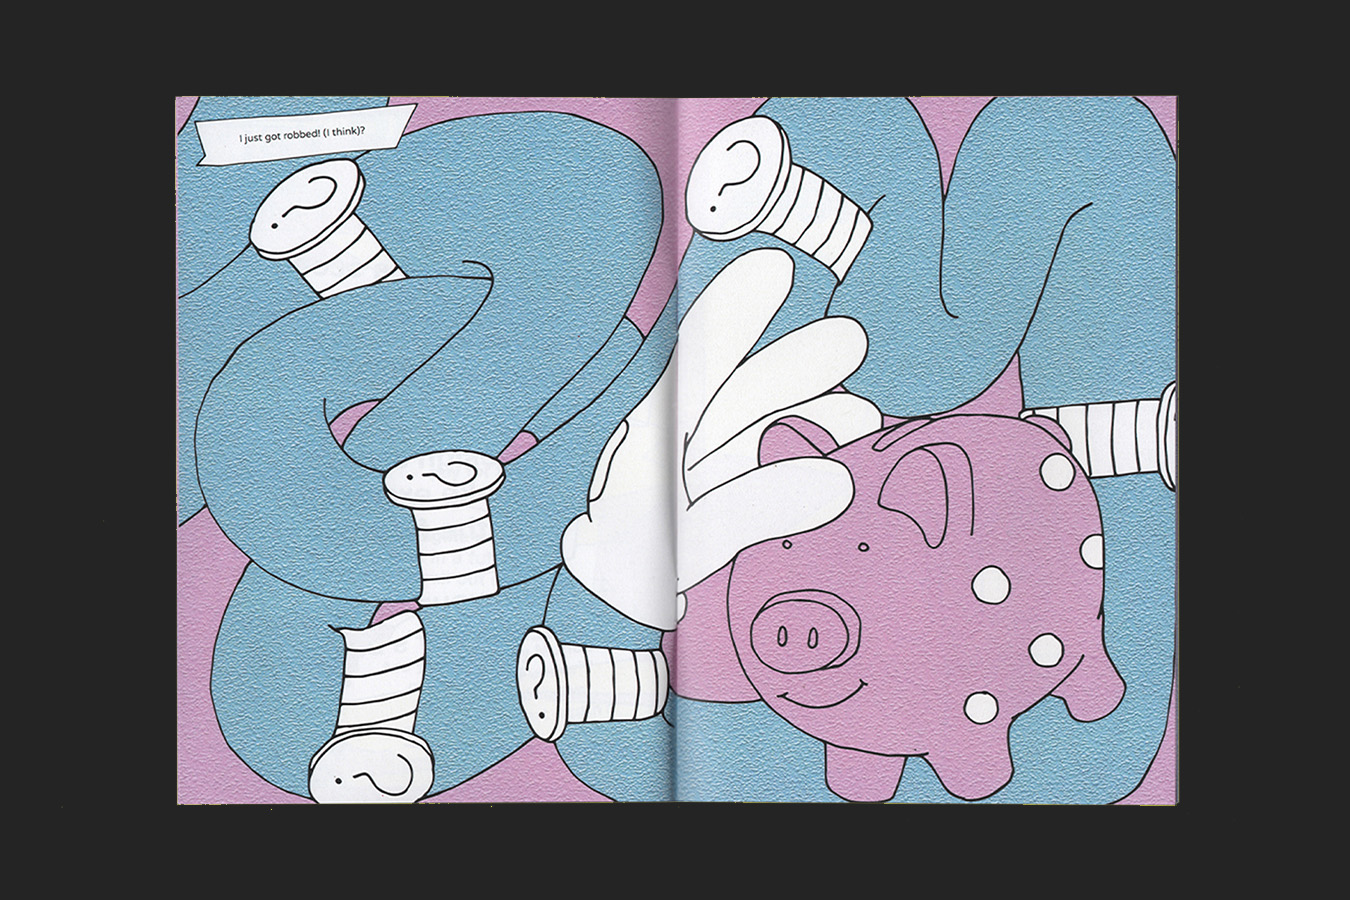 A double page illustration of elongated blue arms with white hands holding a pink piggy bank